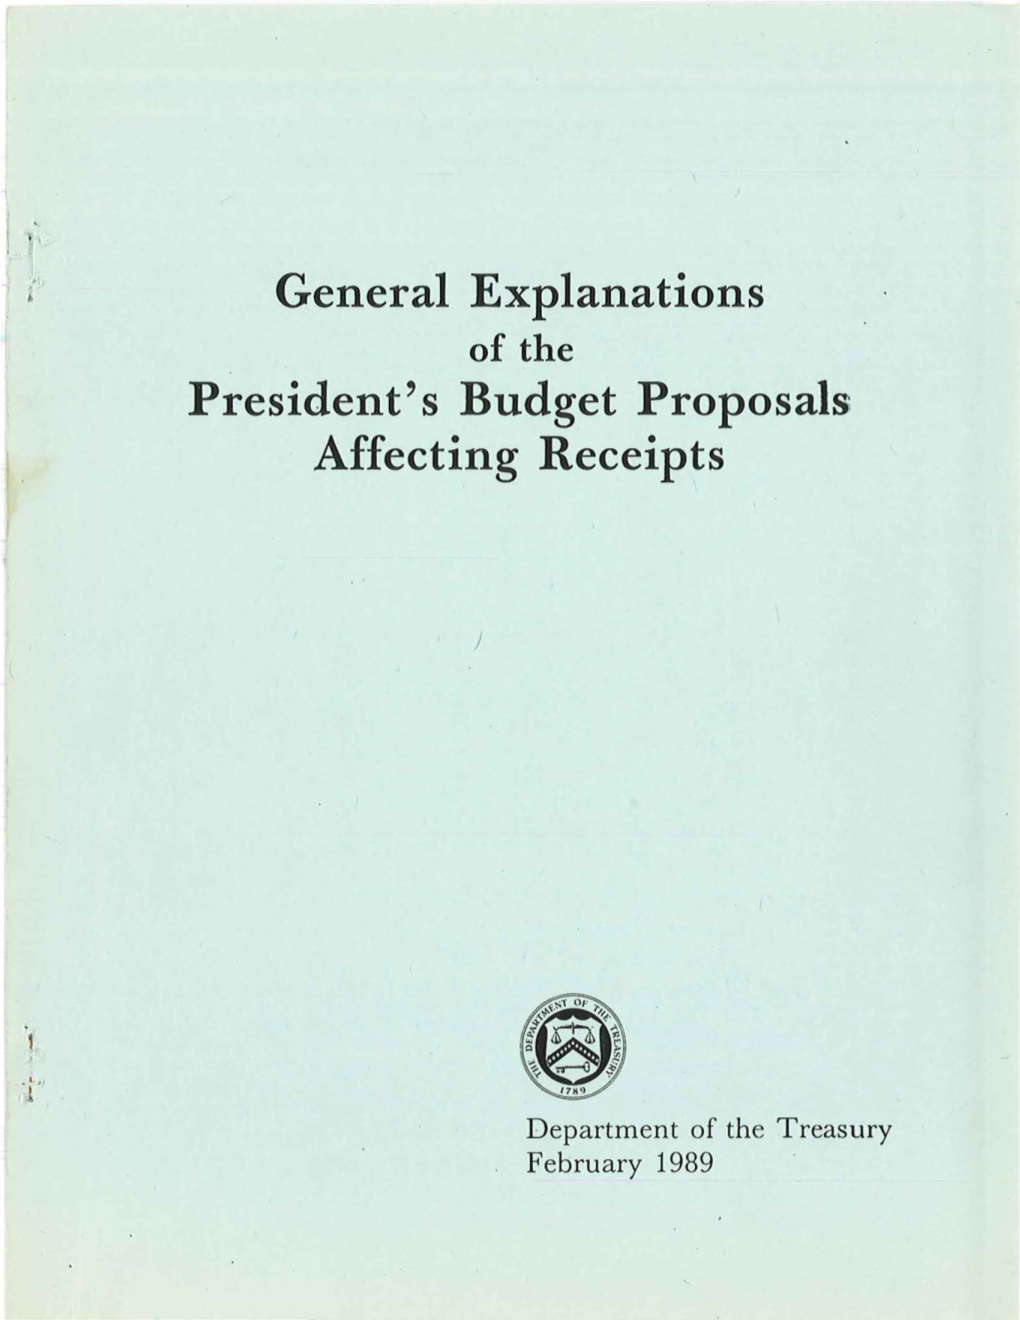 General Explanations of the President's Budget Proposals Affecting Receipts